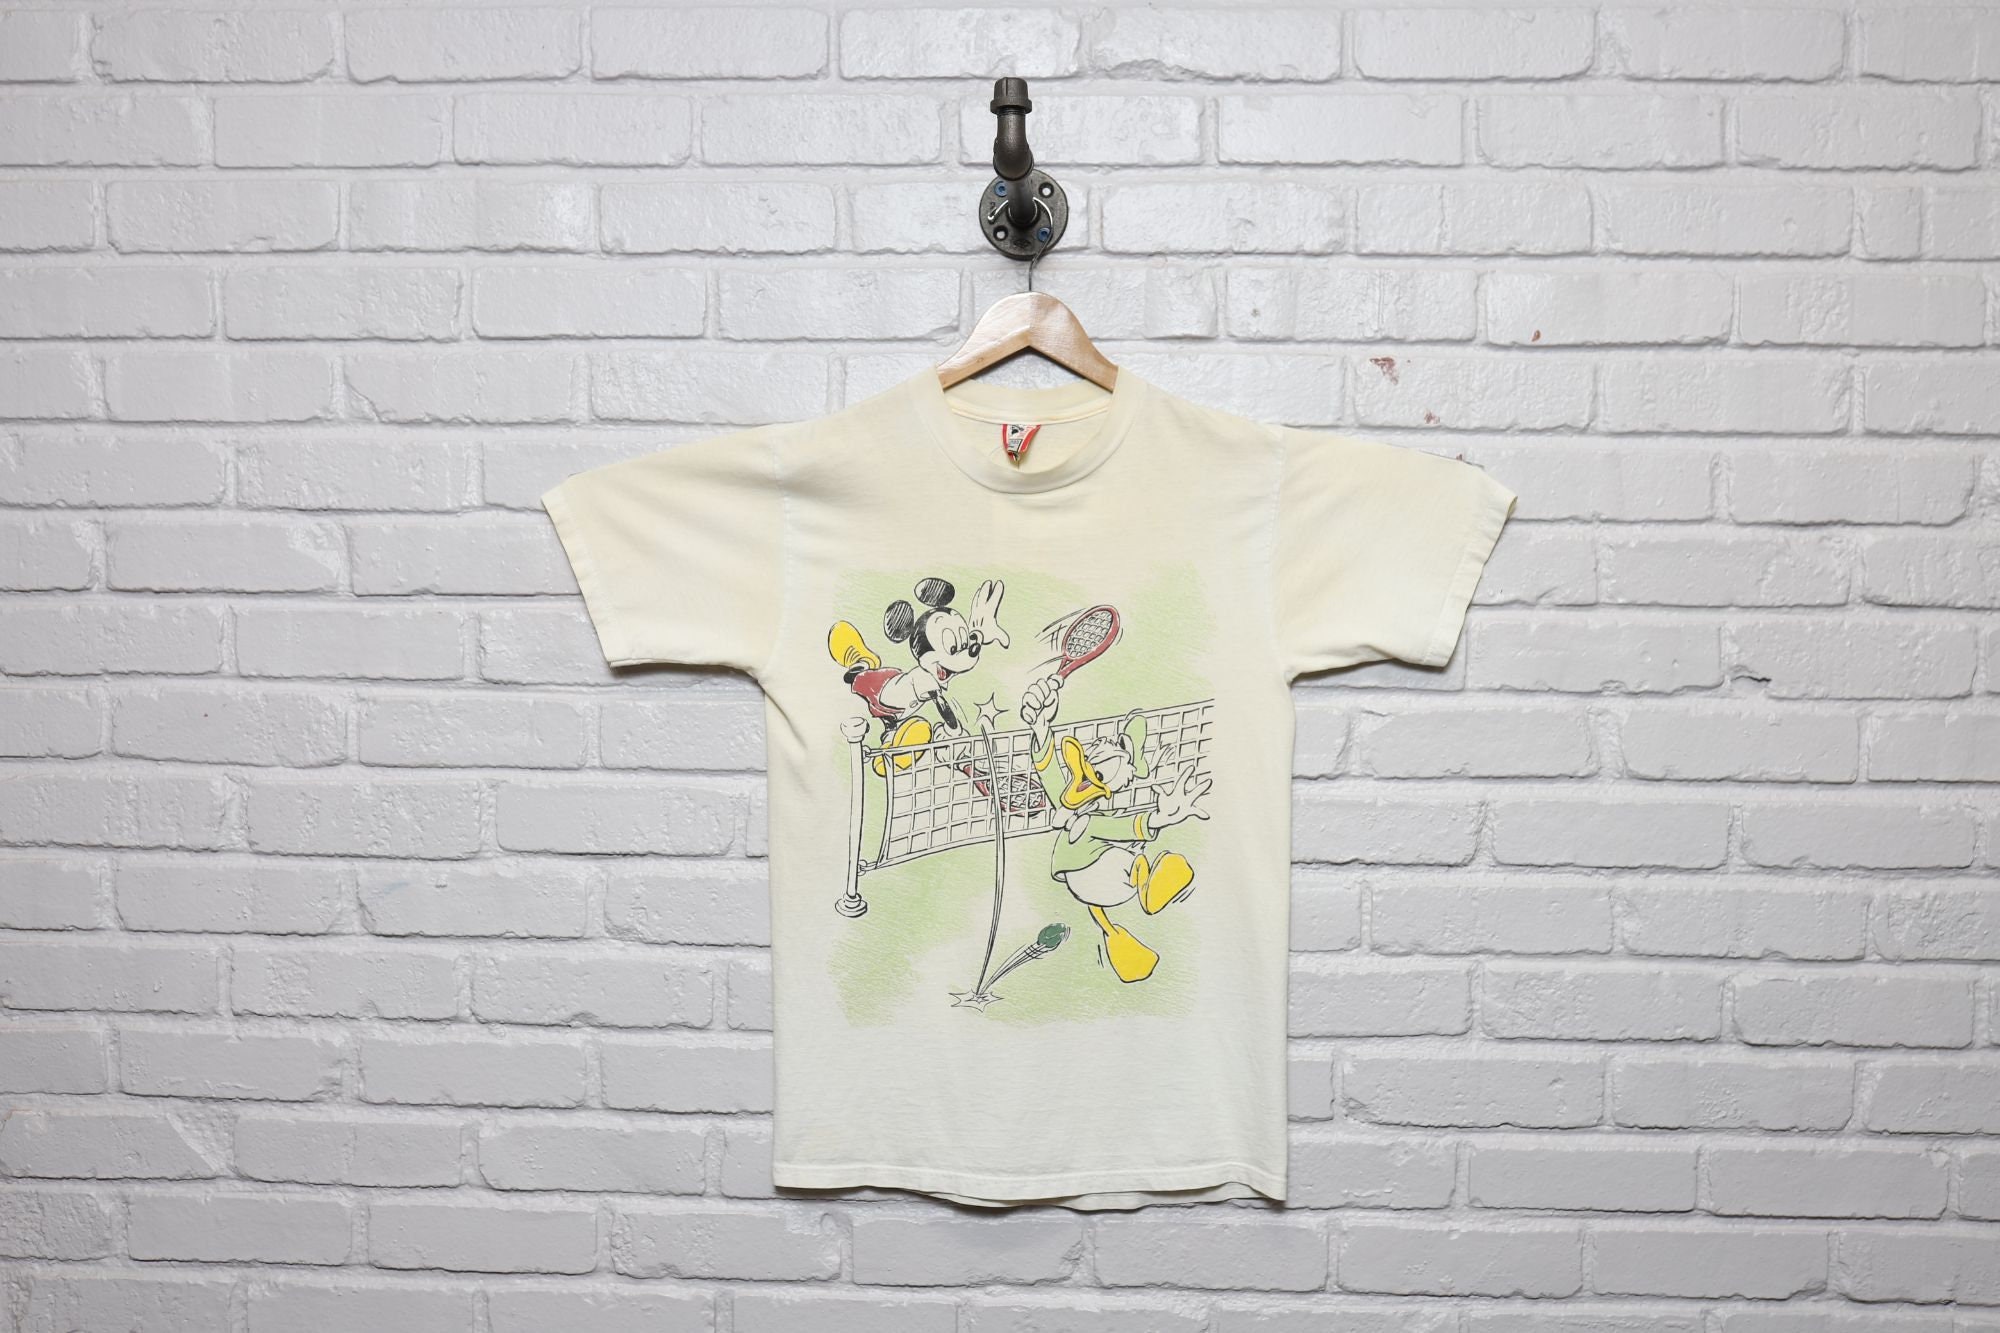 70s-80s WCT テニスtee vintage ヴィンテージ 新版 - トップス